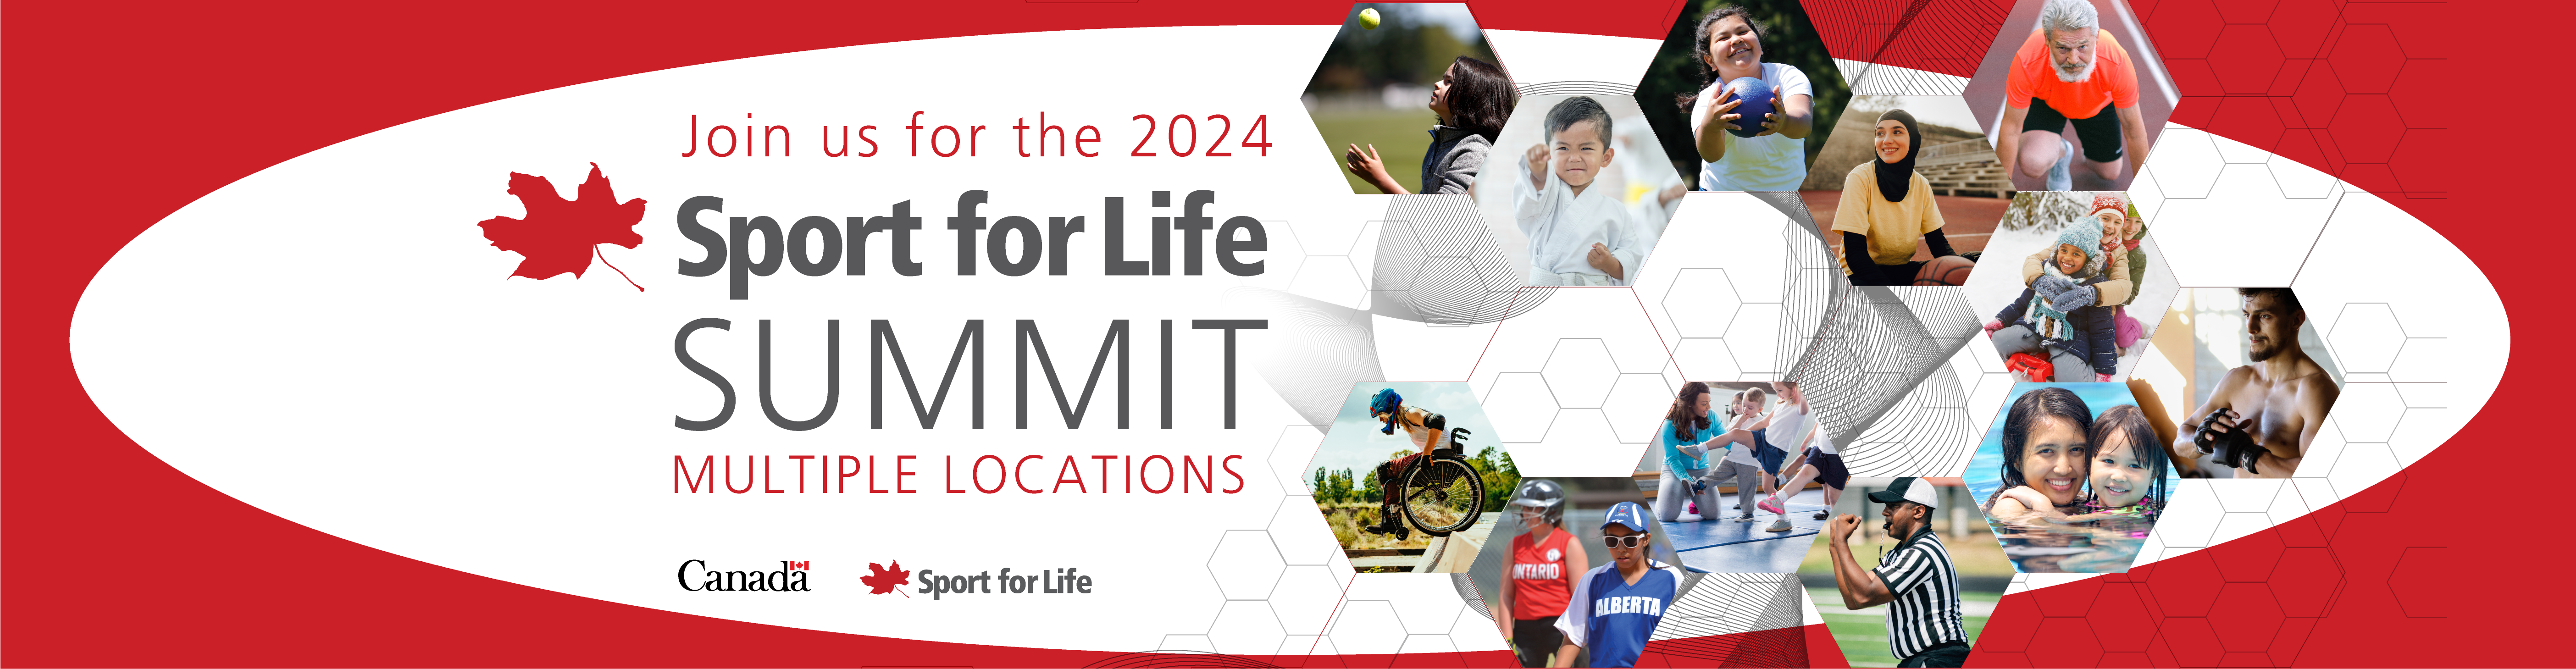 2024 Sport for Life Summit